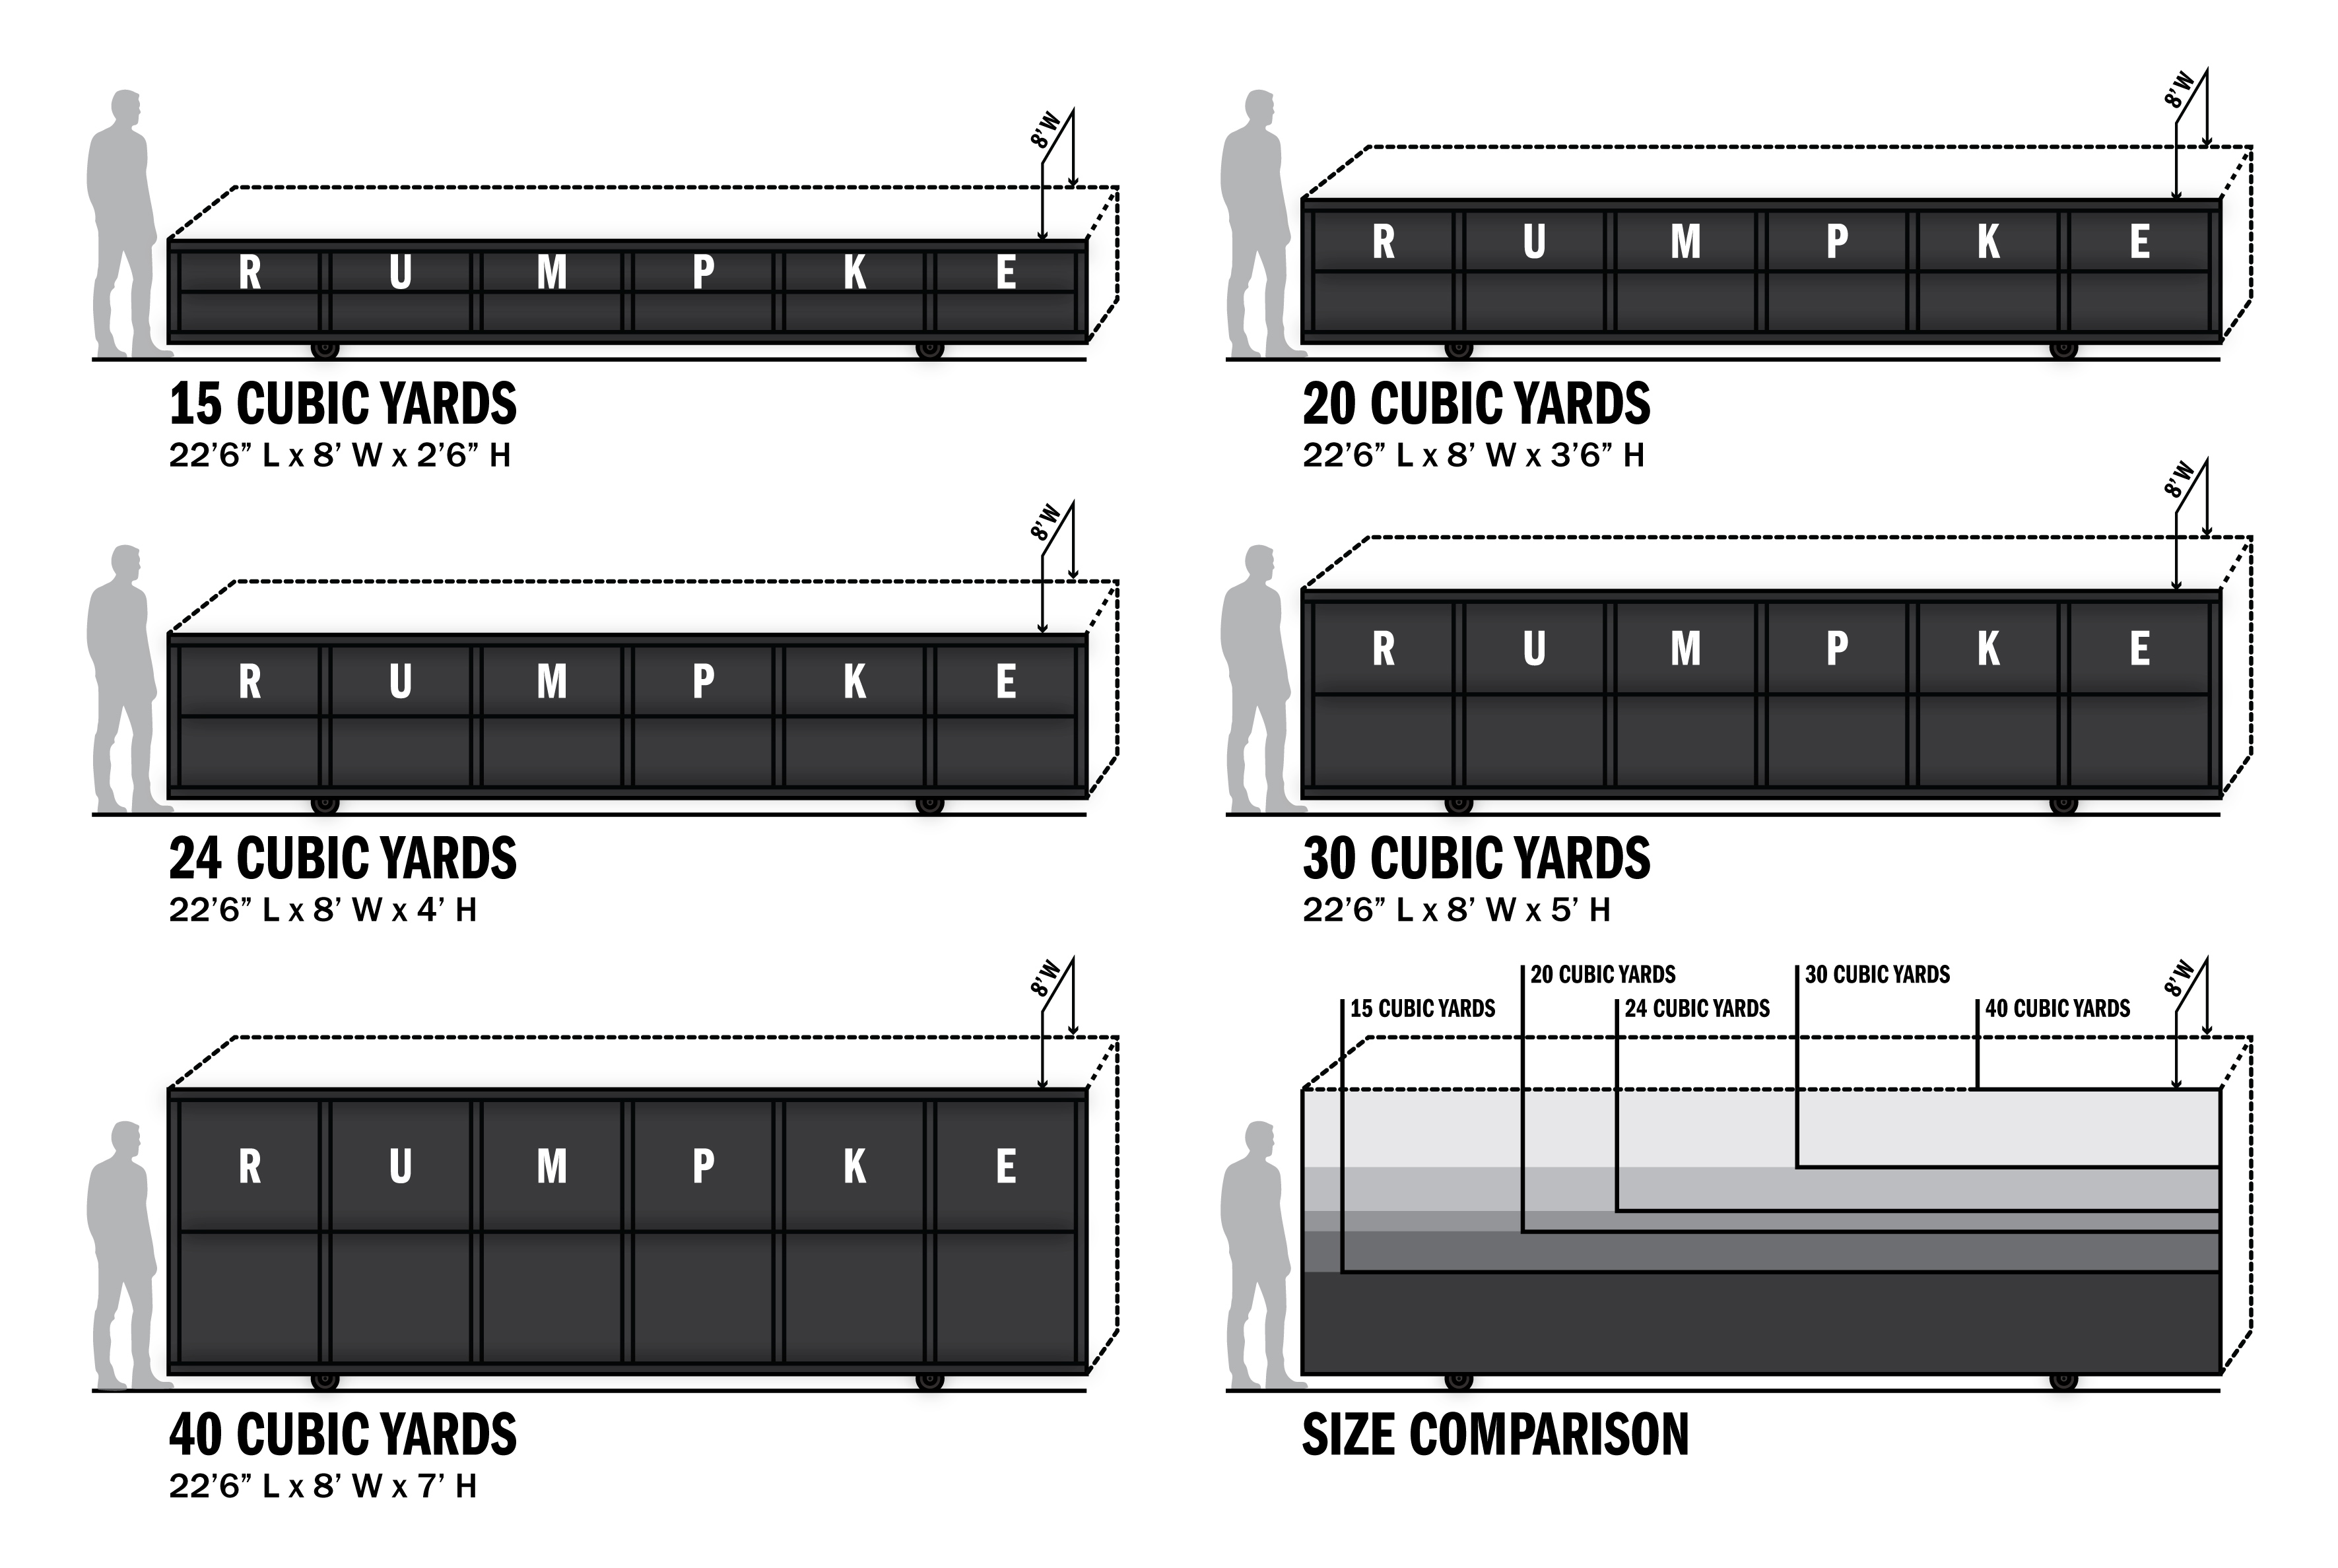 Comparison of dumpster rental dimensions for 15, 20, 24, 30, and 40 cubic yard dumpster sizes.